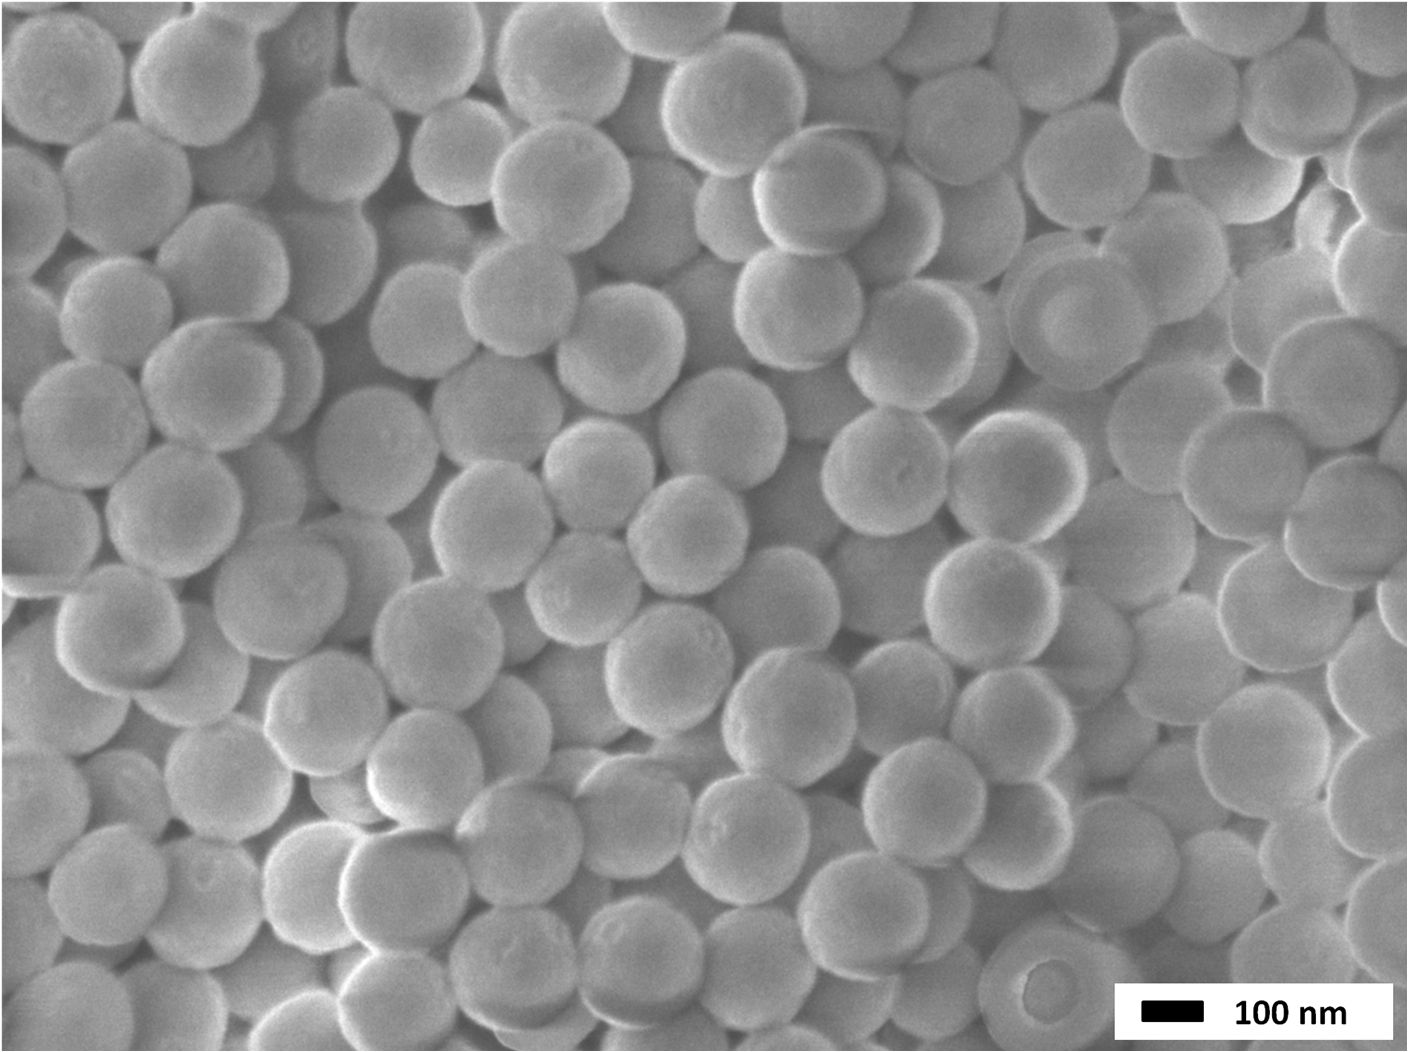 Nanospheres—What Are They? Can You Use in Them Artists' Paint?